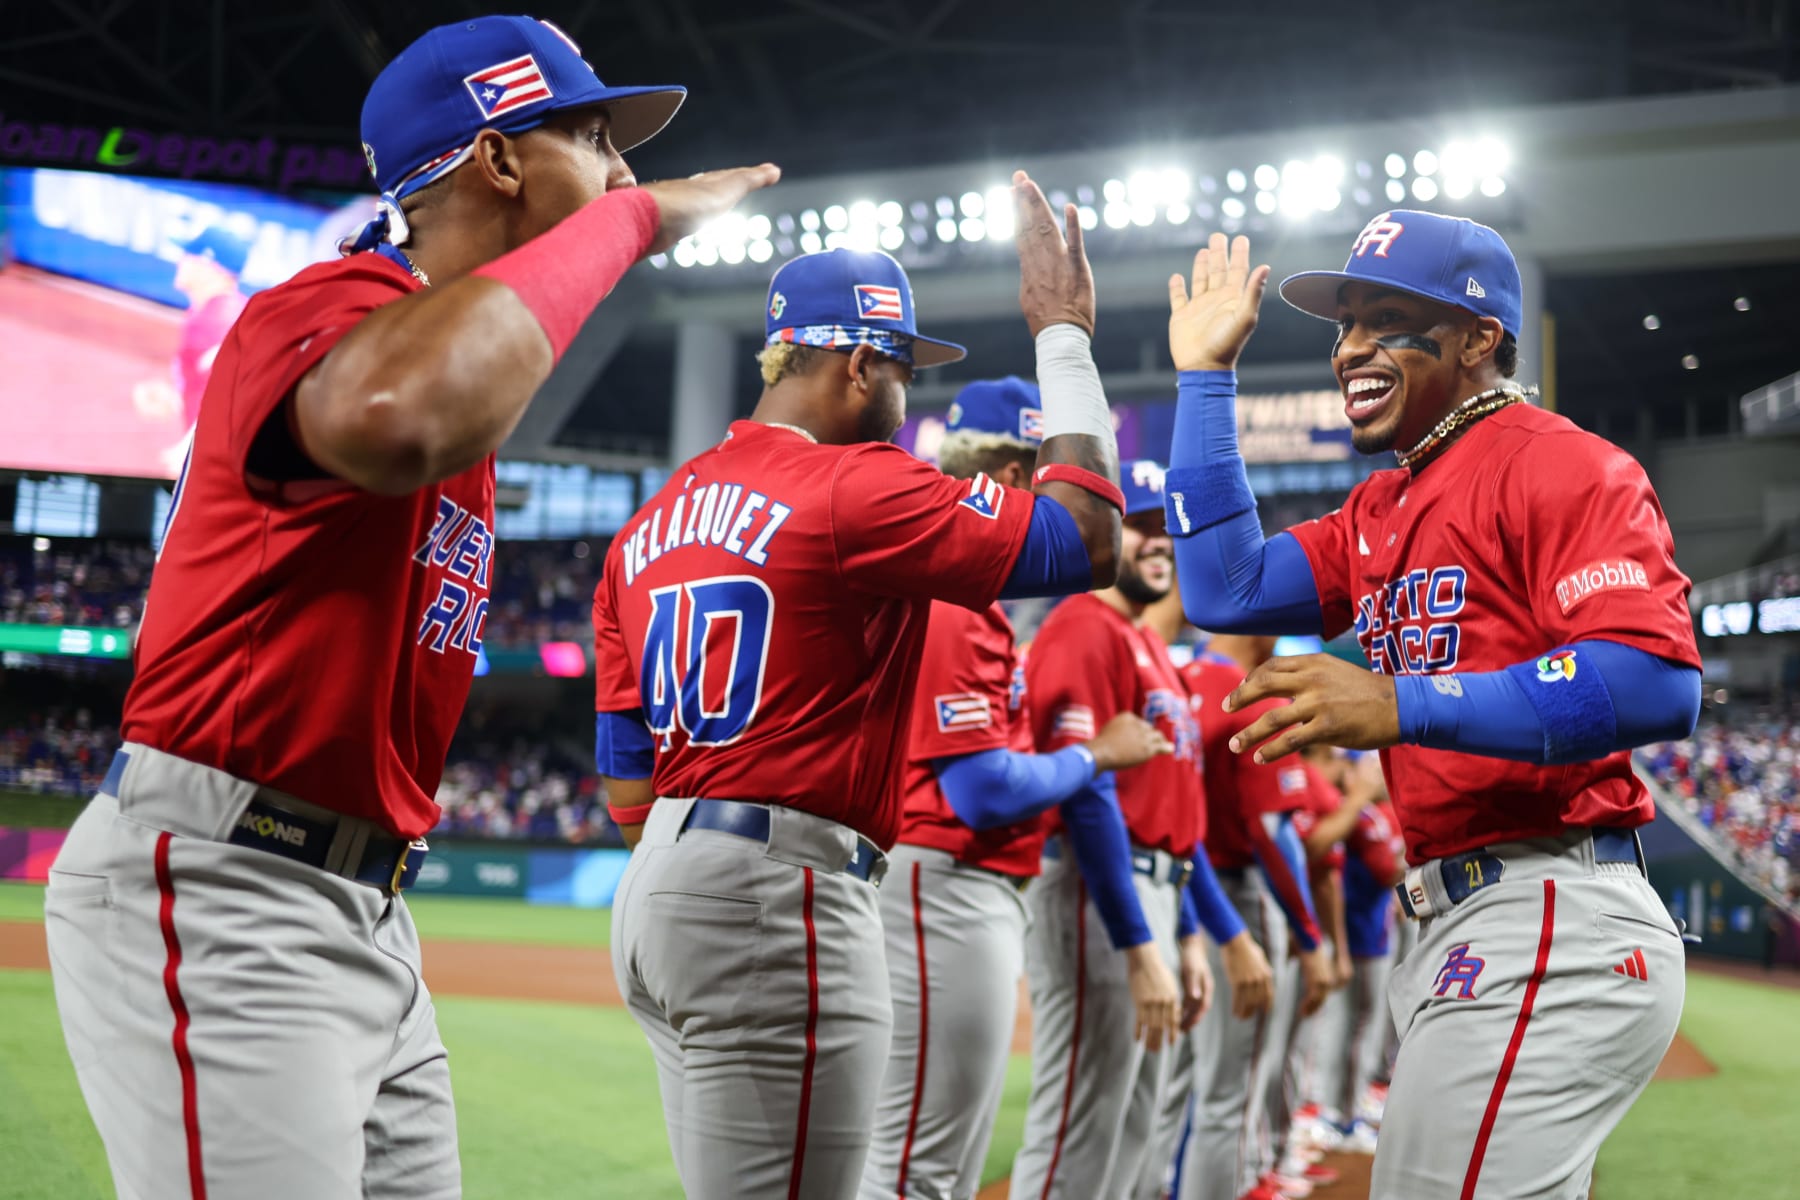 World Baseball Classic uniforms, ranked in 2023